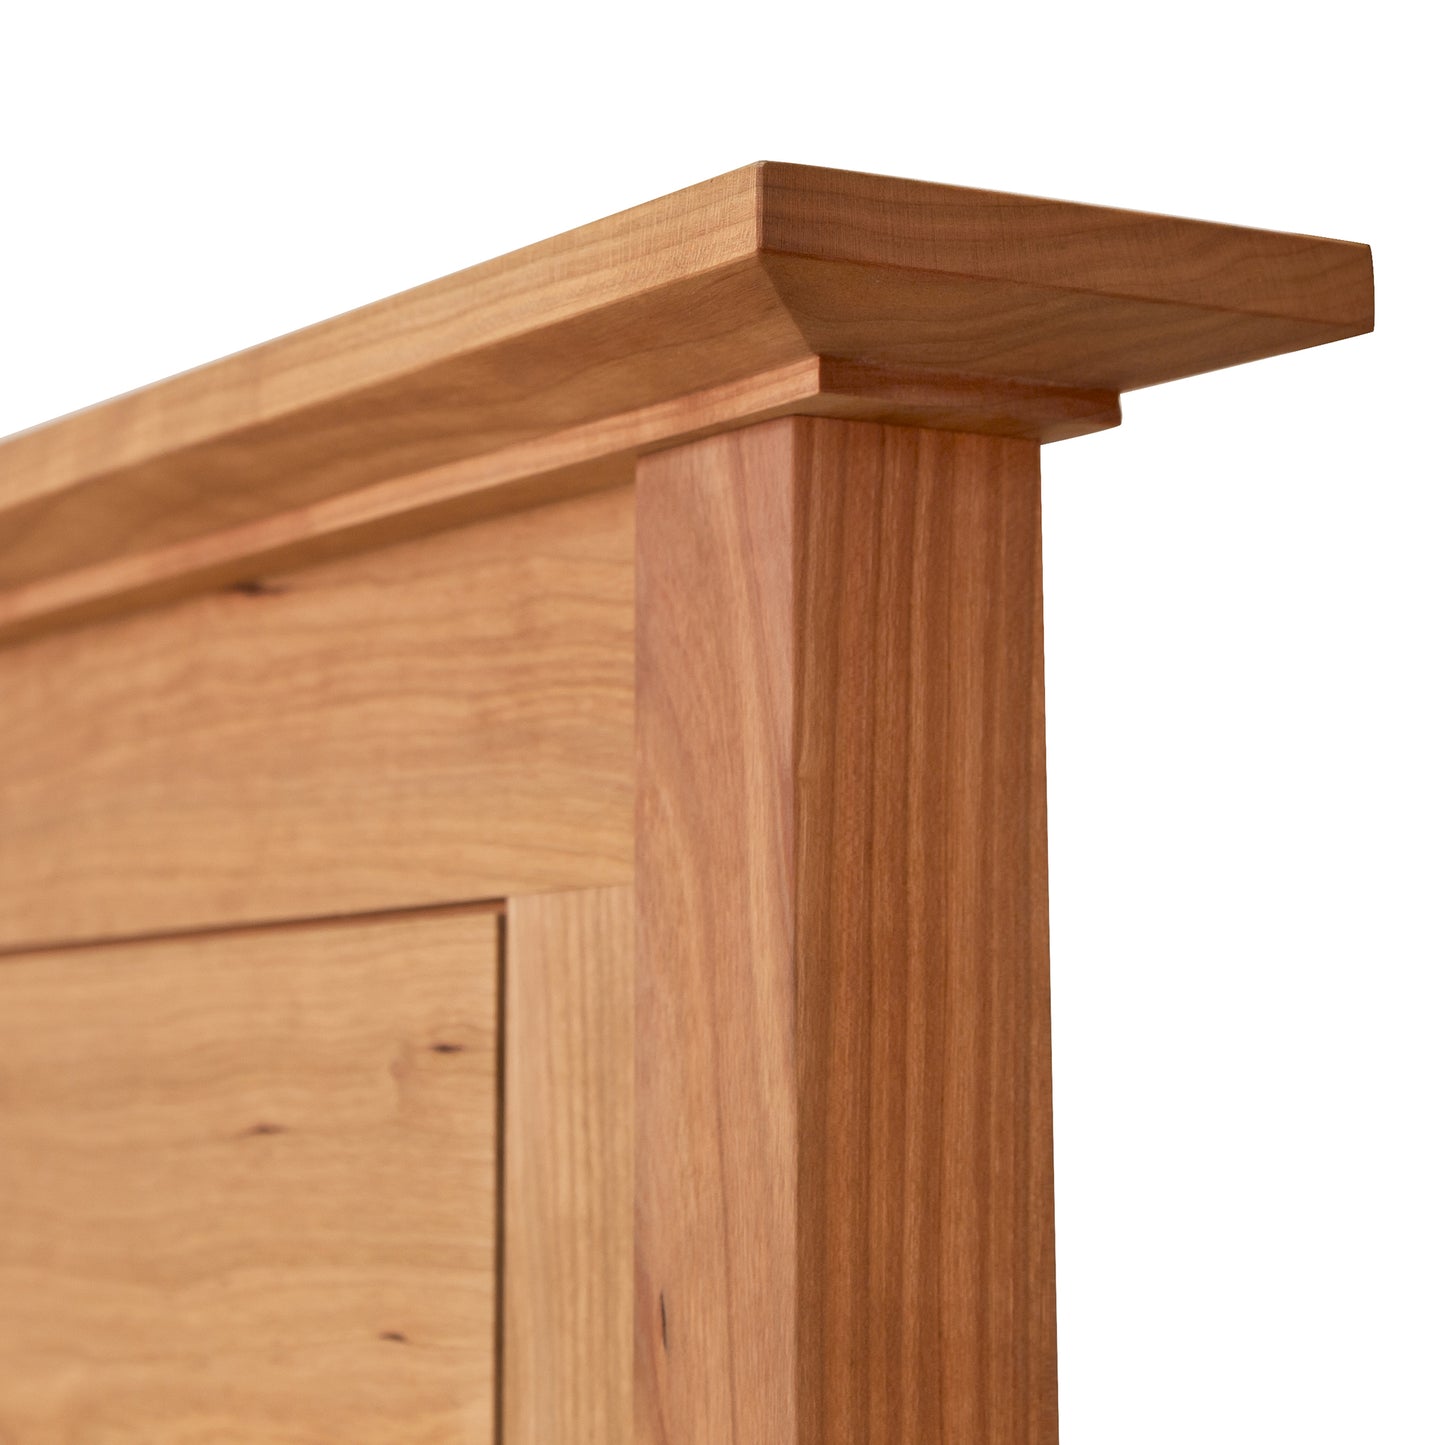 A close up view of the Maple Corner Woodworks American Shaker Panel Bed.